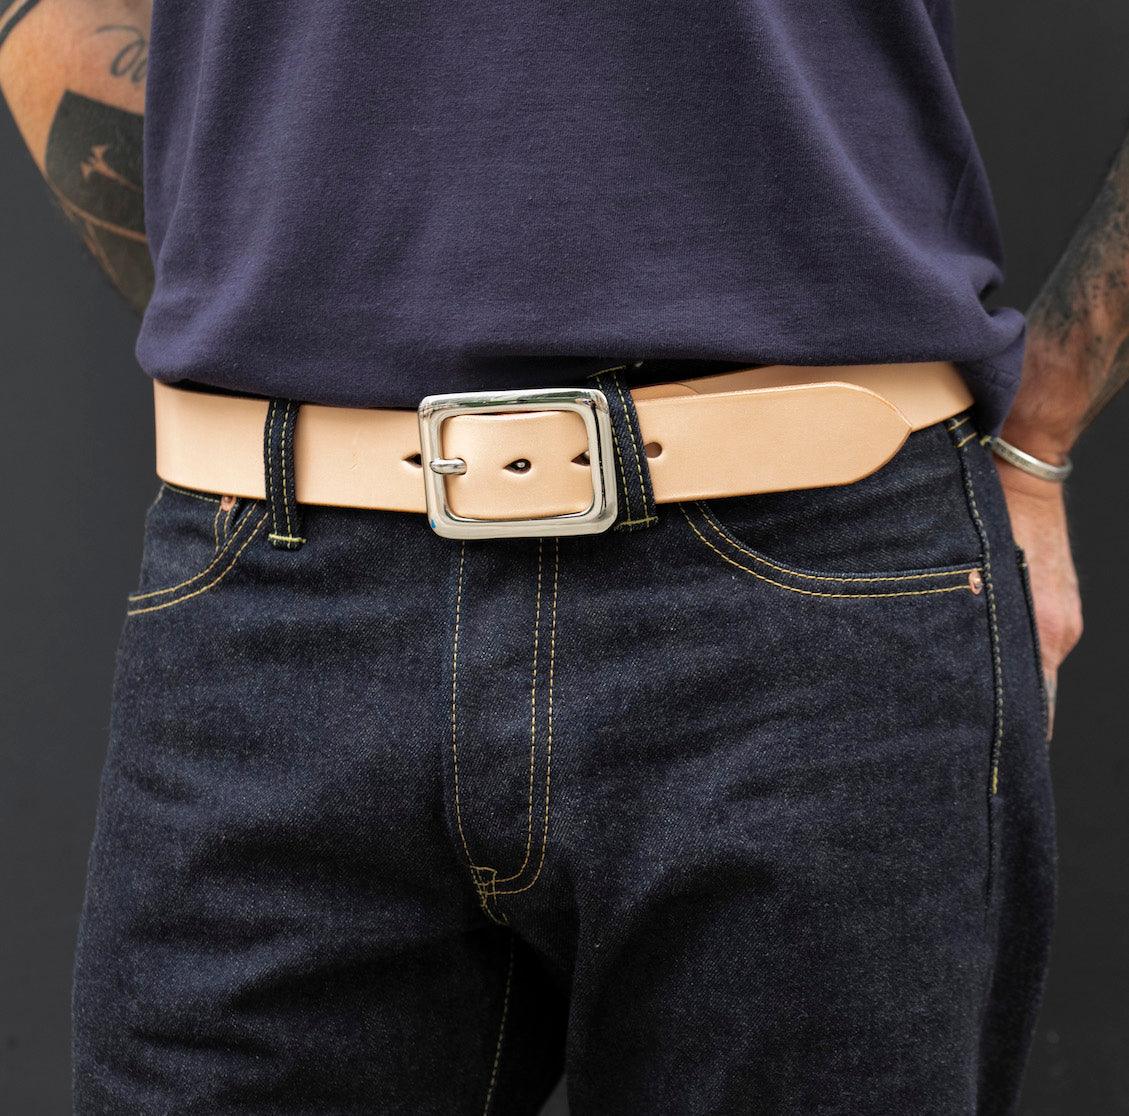 IHB-08-NAT - Heavy Duty "Tochigi" Leather Belt With Nickel Plated Garrison Buckle - Natural